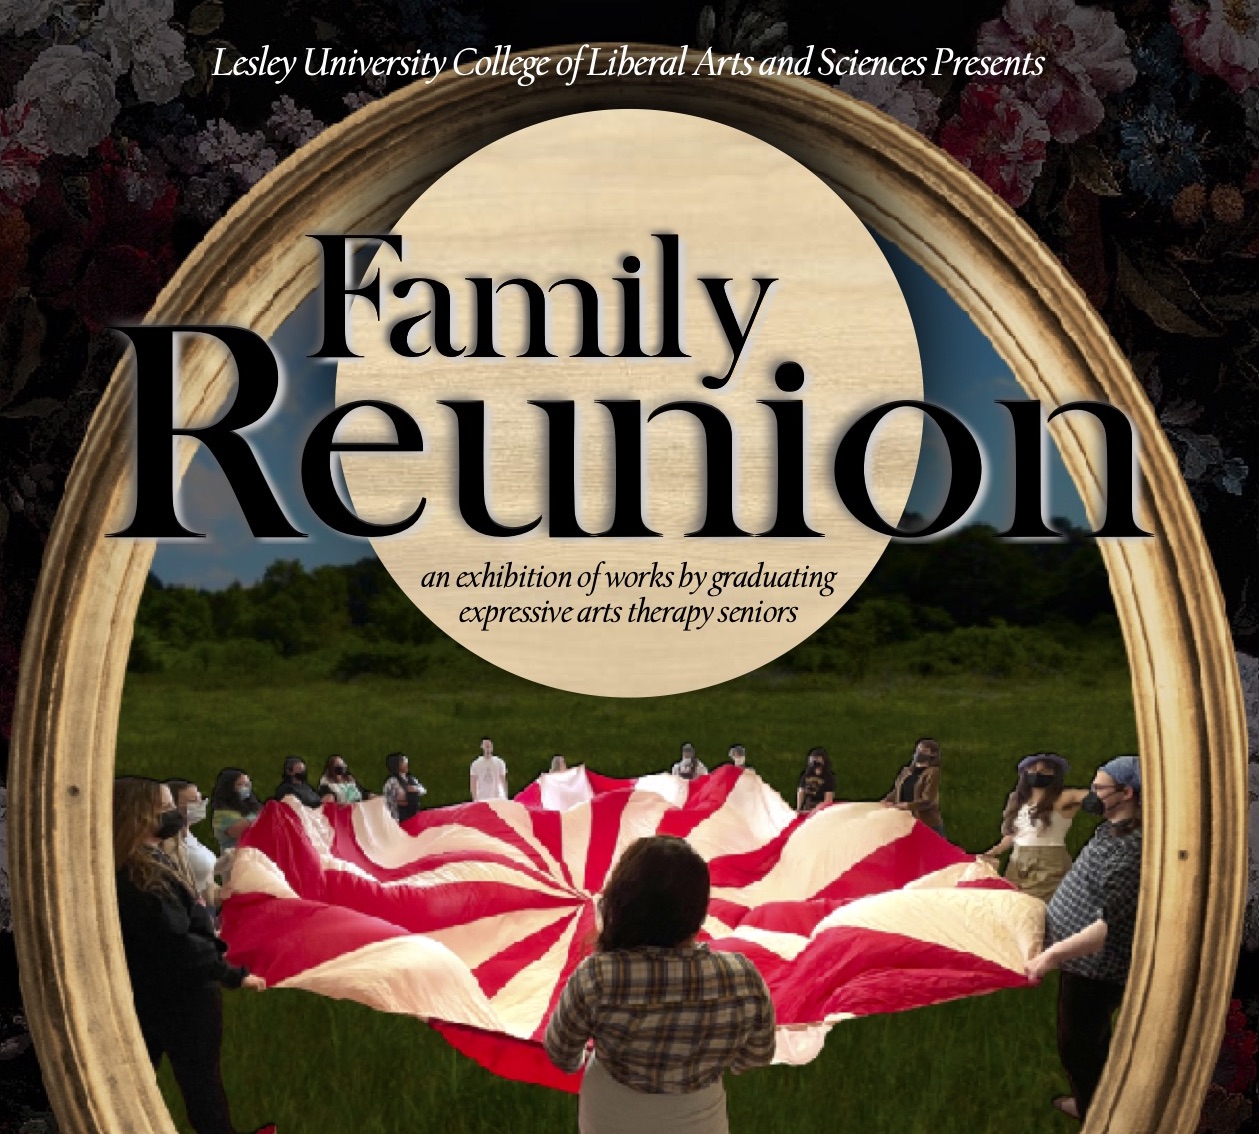 A flyer that reads "Lesley University College of Liberal Arts and Sciences Presents Family Reunion, an exhibition of works by graduating expressive arts therapy seniors" with an image of people holding a red and white blanket in a field